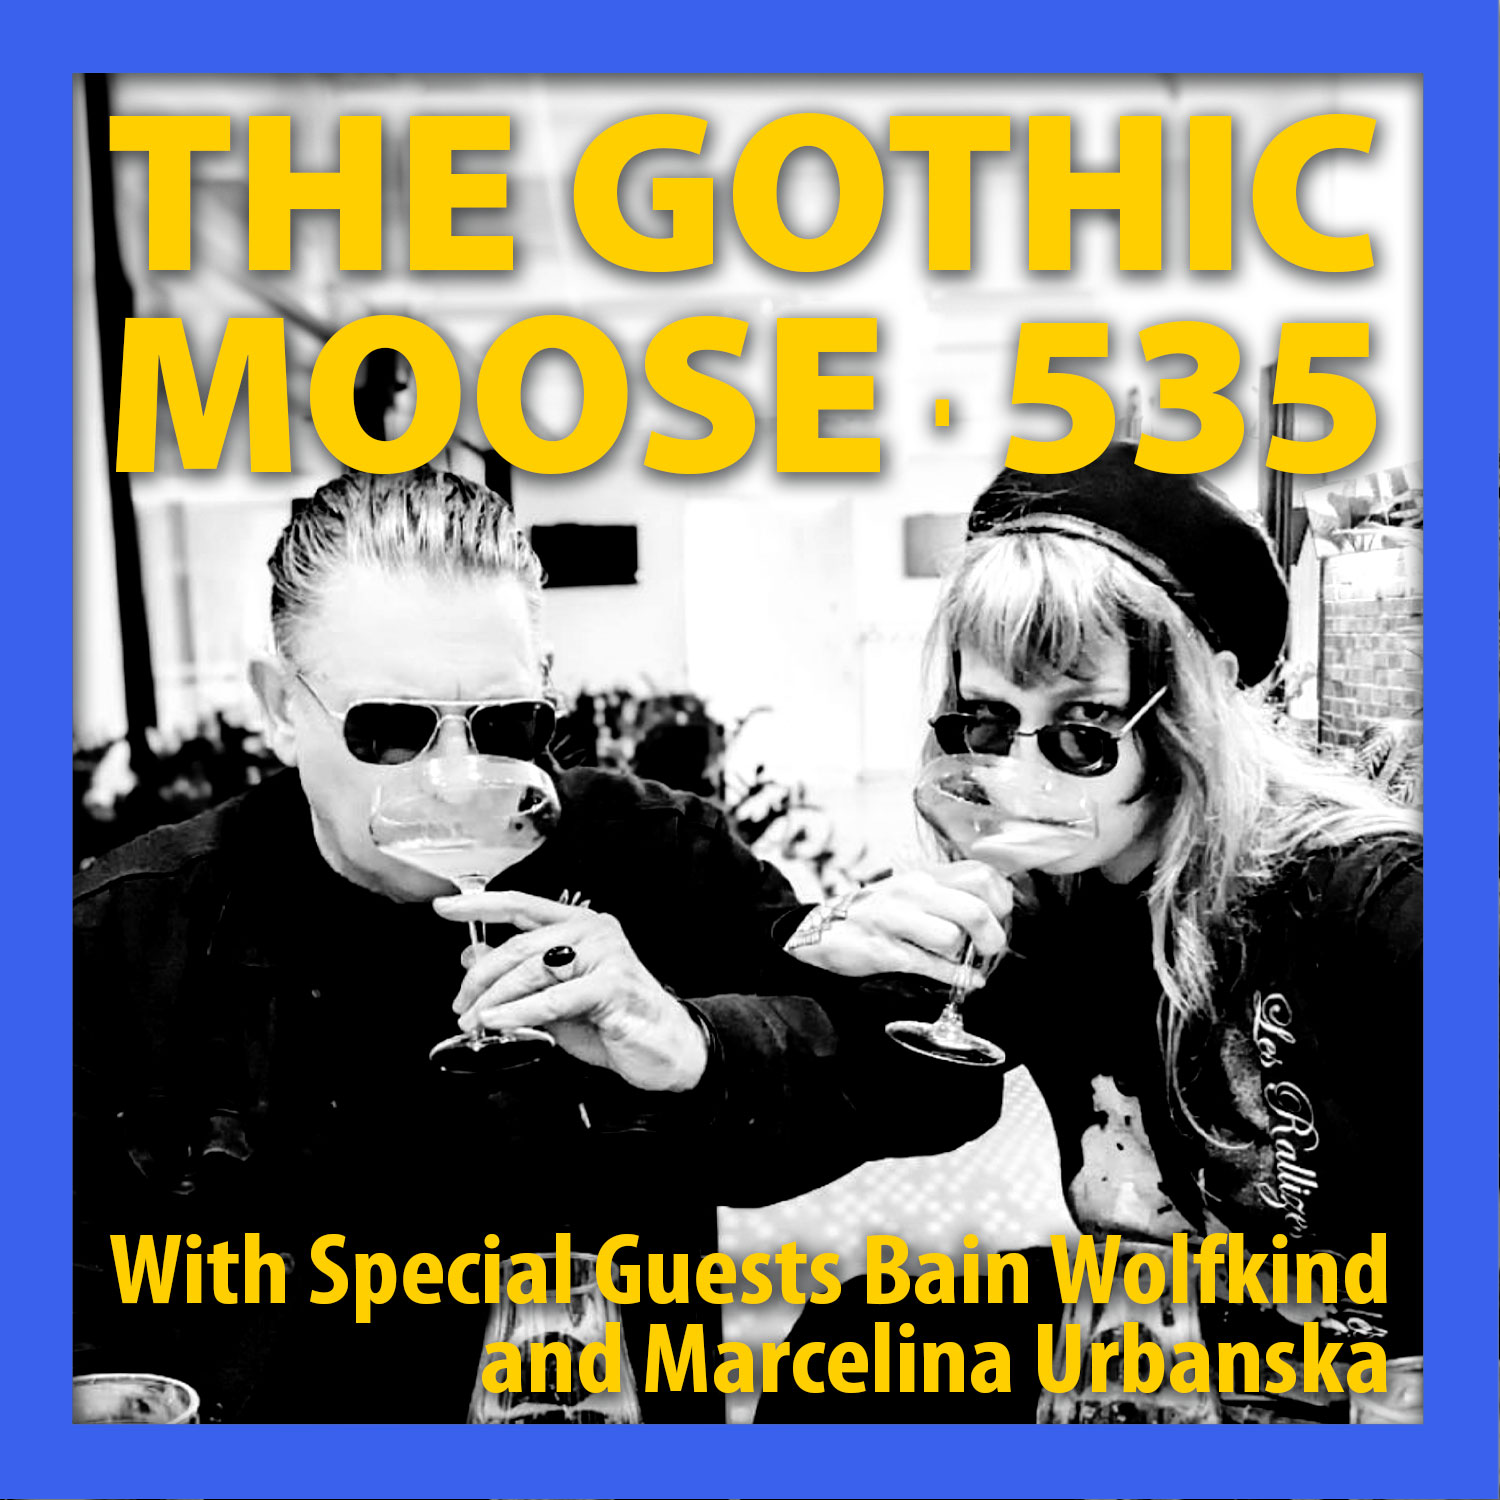 The Gothic Moose – Episode 535 – with Special Guests Bain Wolfkind and Marcelina Urbanska